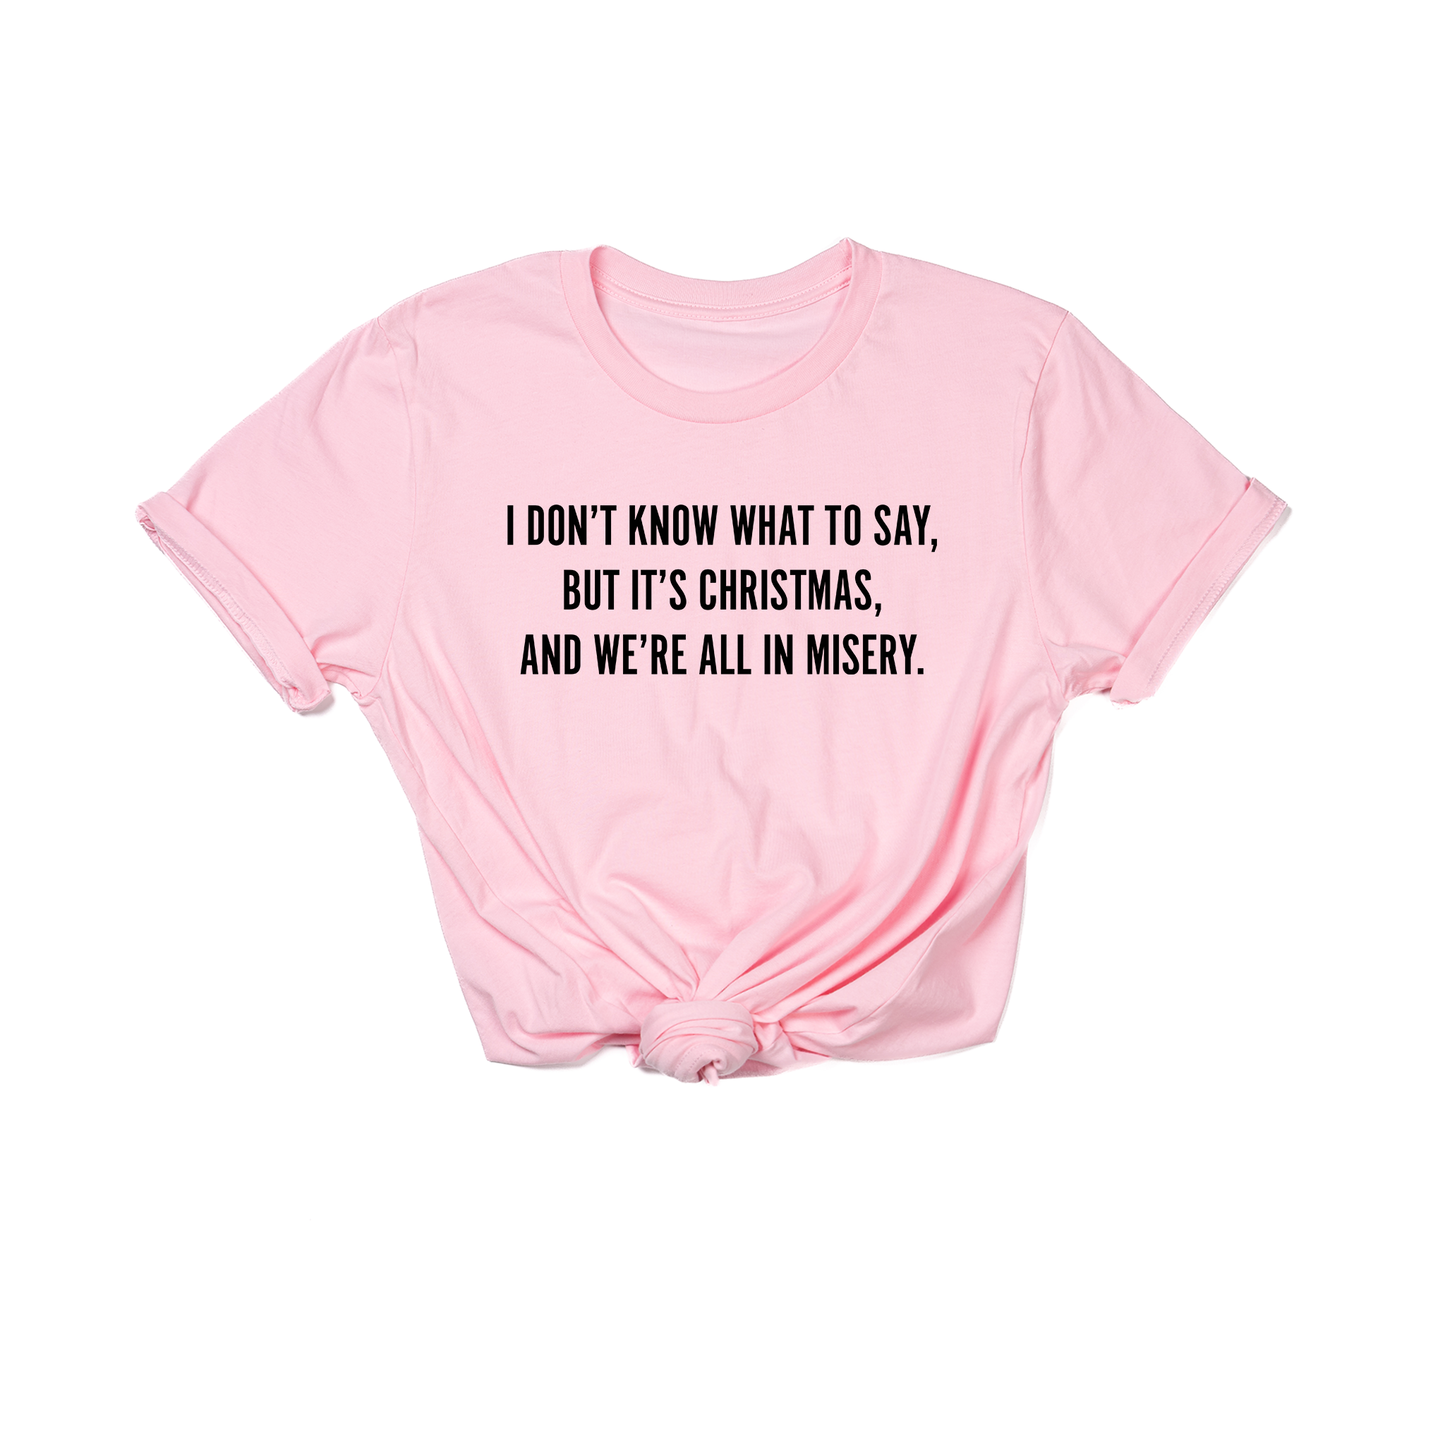 I Don't Know What to Say, But it's Christmas, and We're All In Misery  (Black) - Tee (Pink)